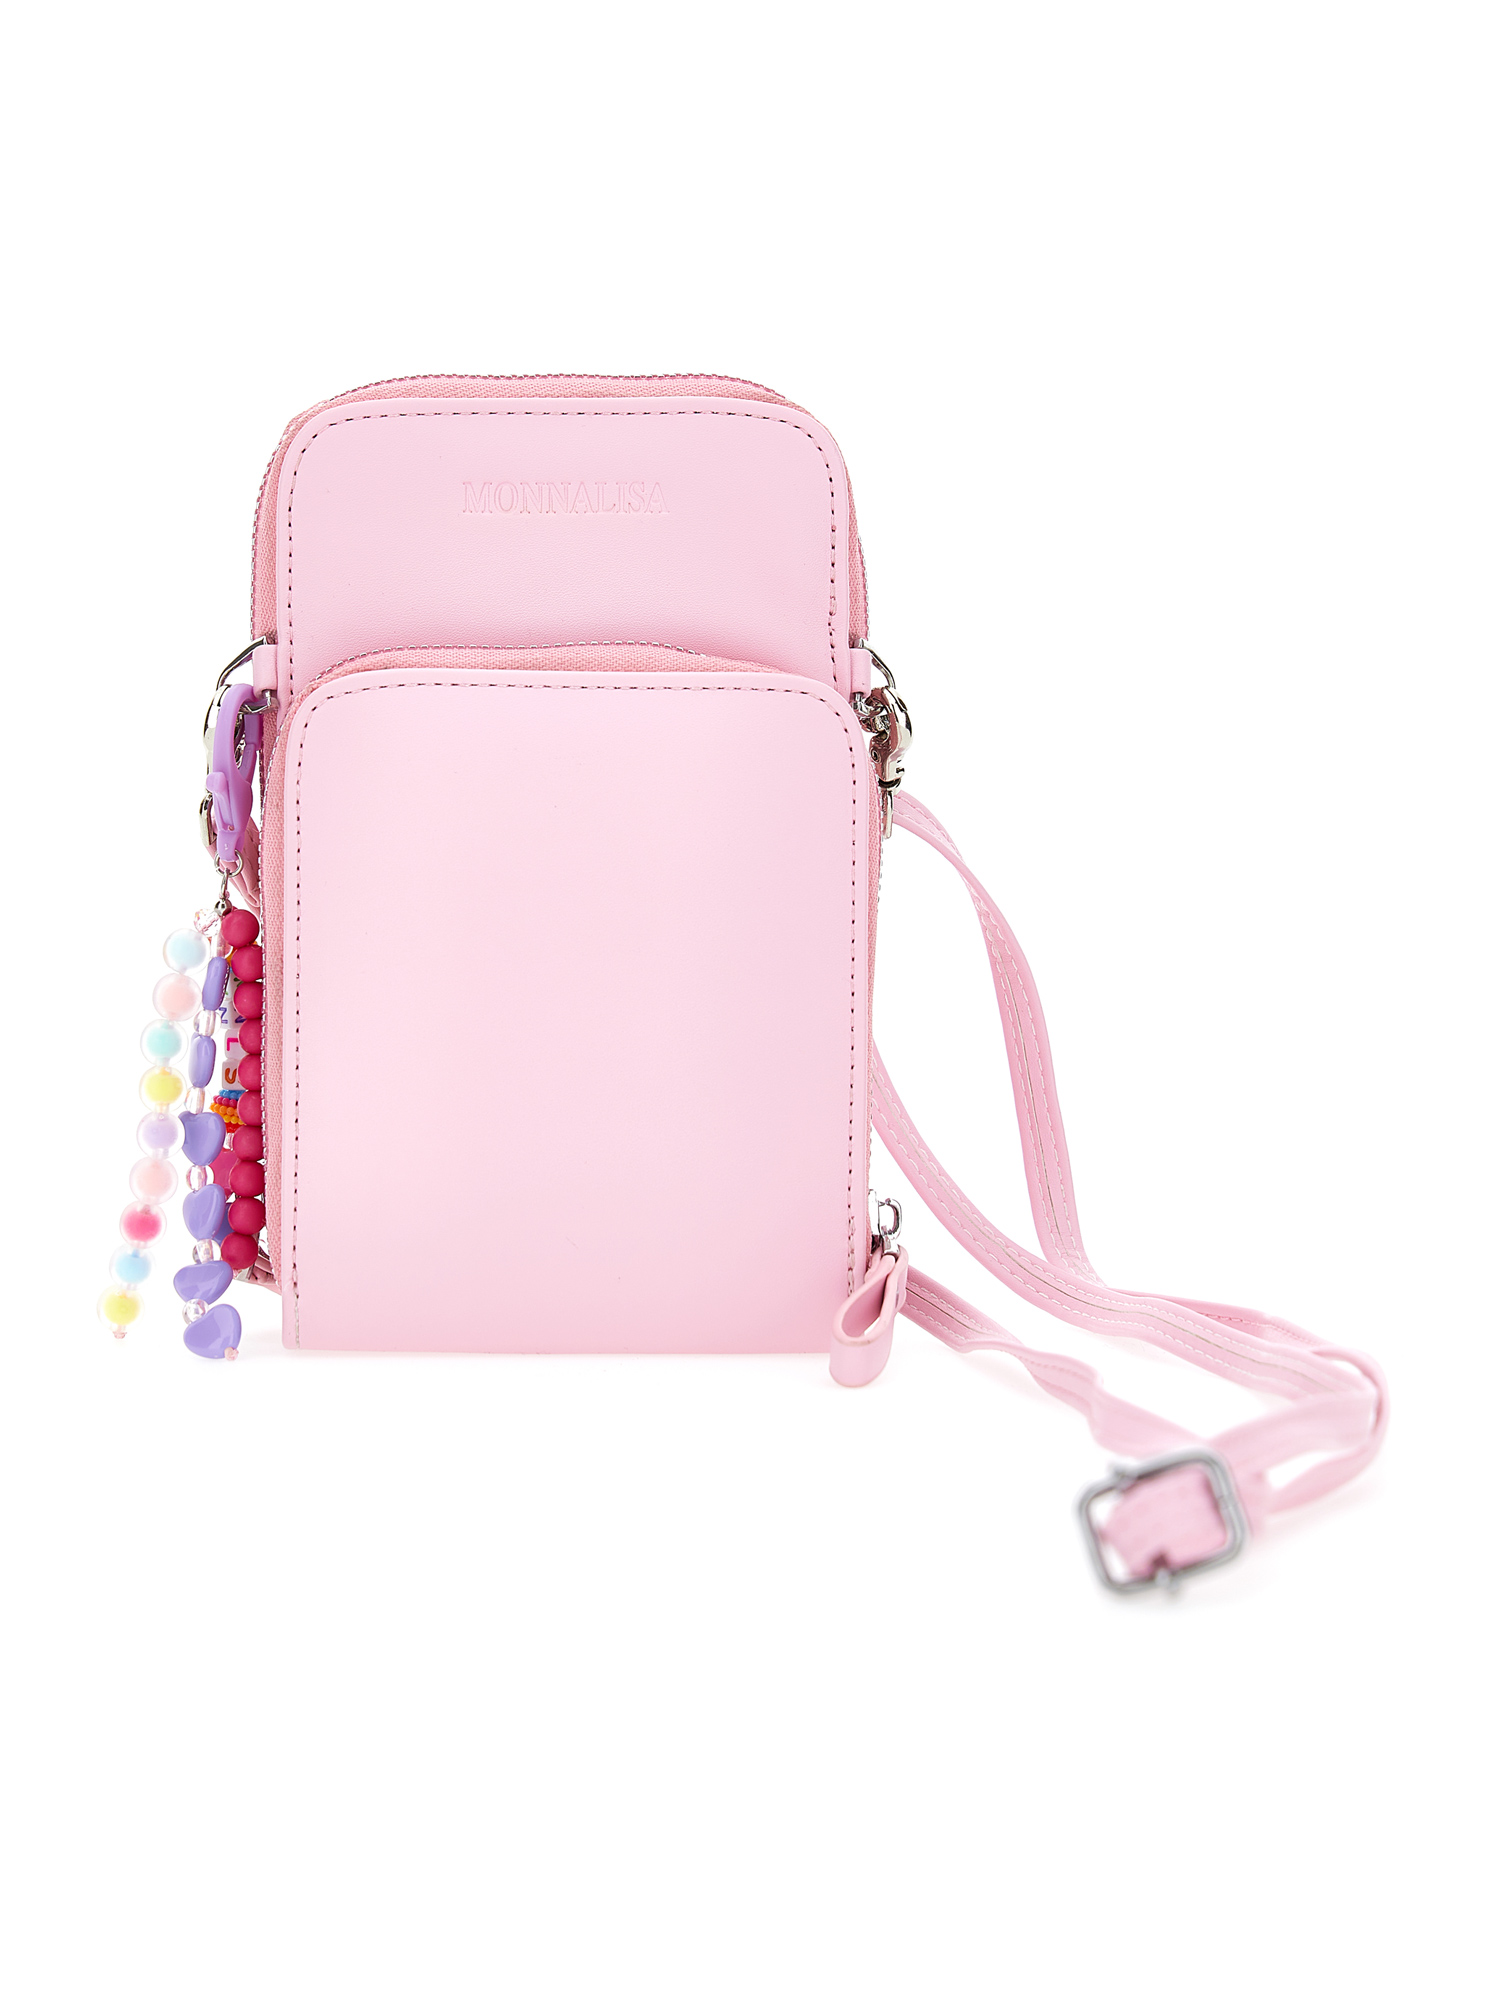 Monnalisa Babies'   Technical Fabric Shoulder Bag With Charm In Bright Peach Pink